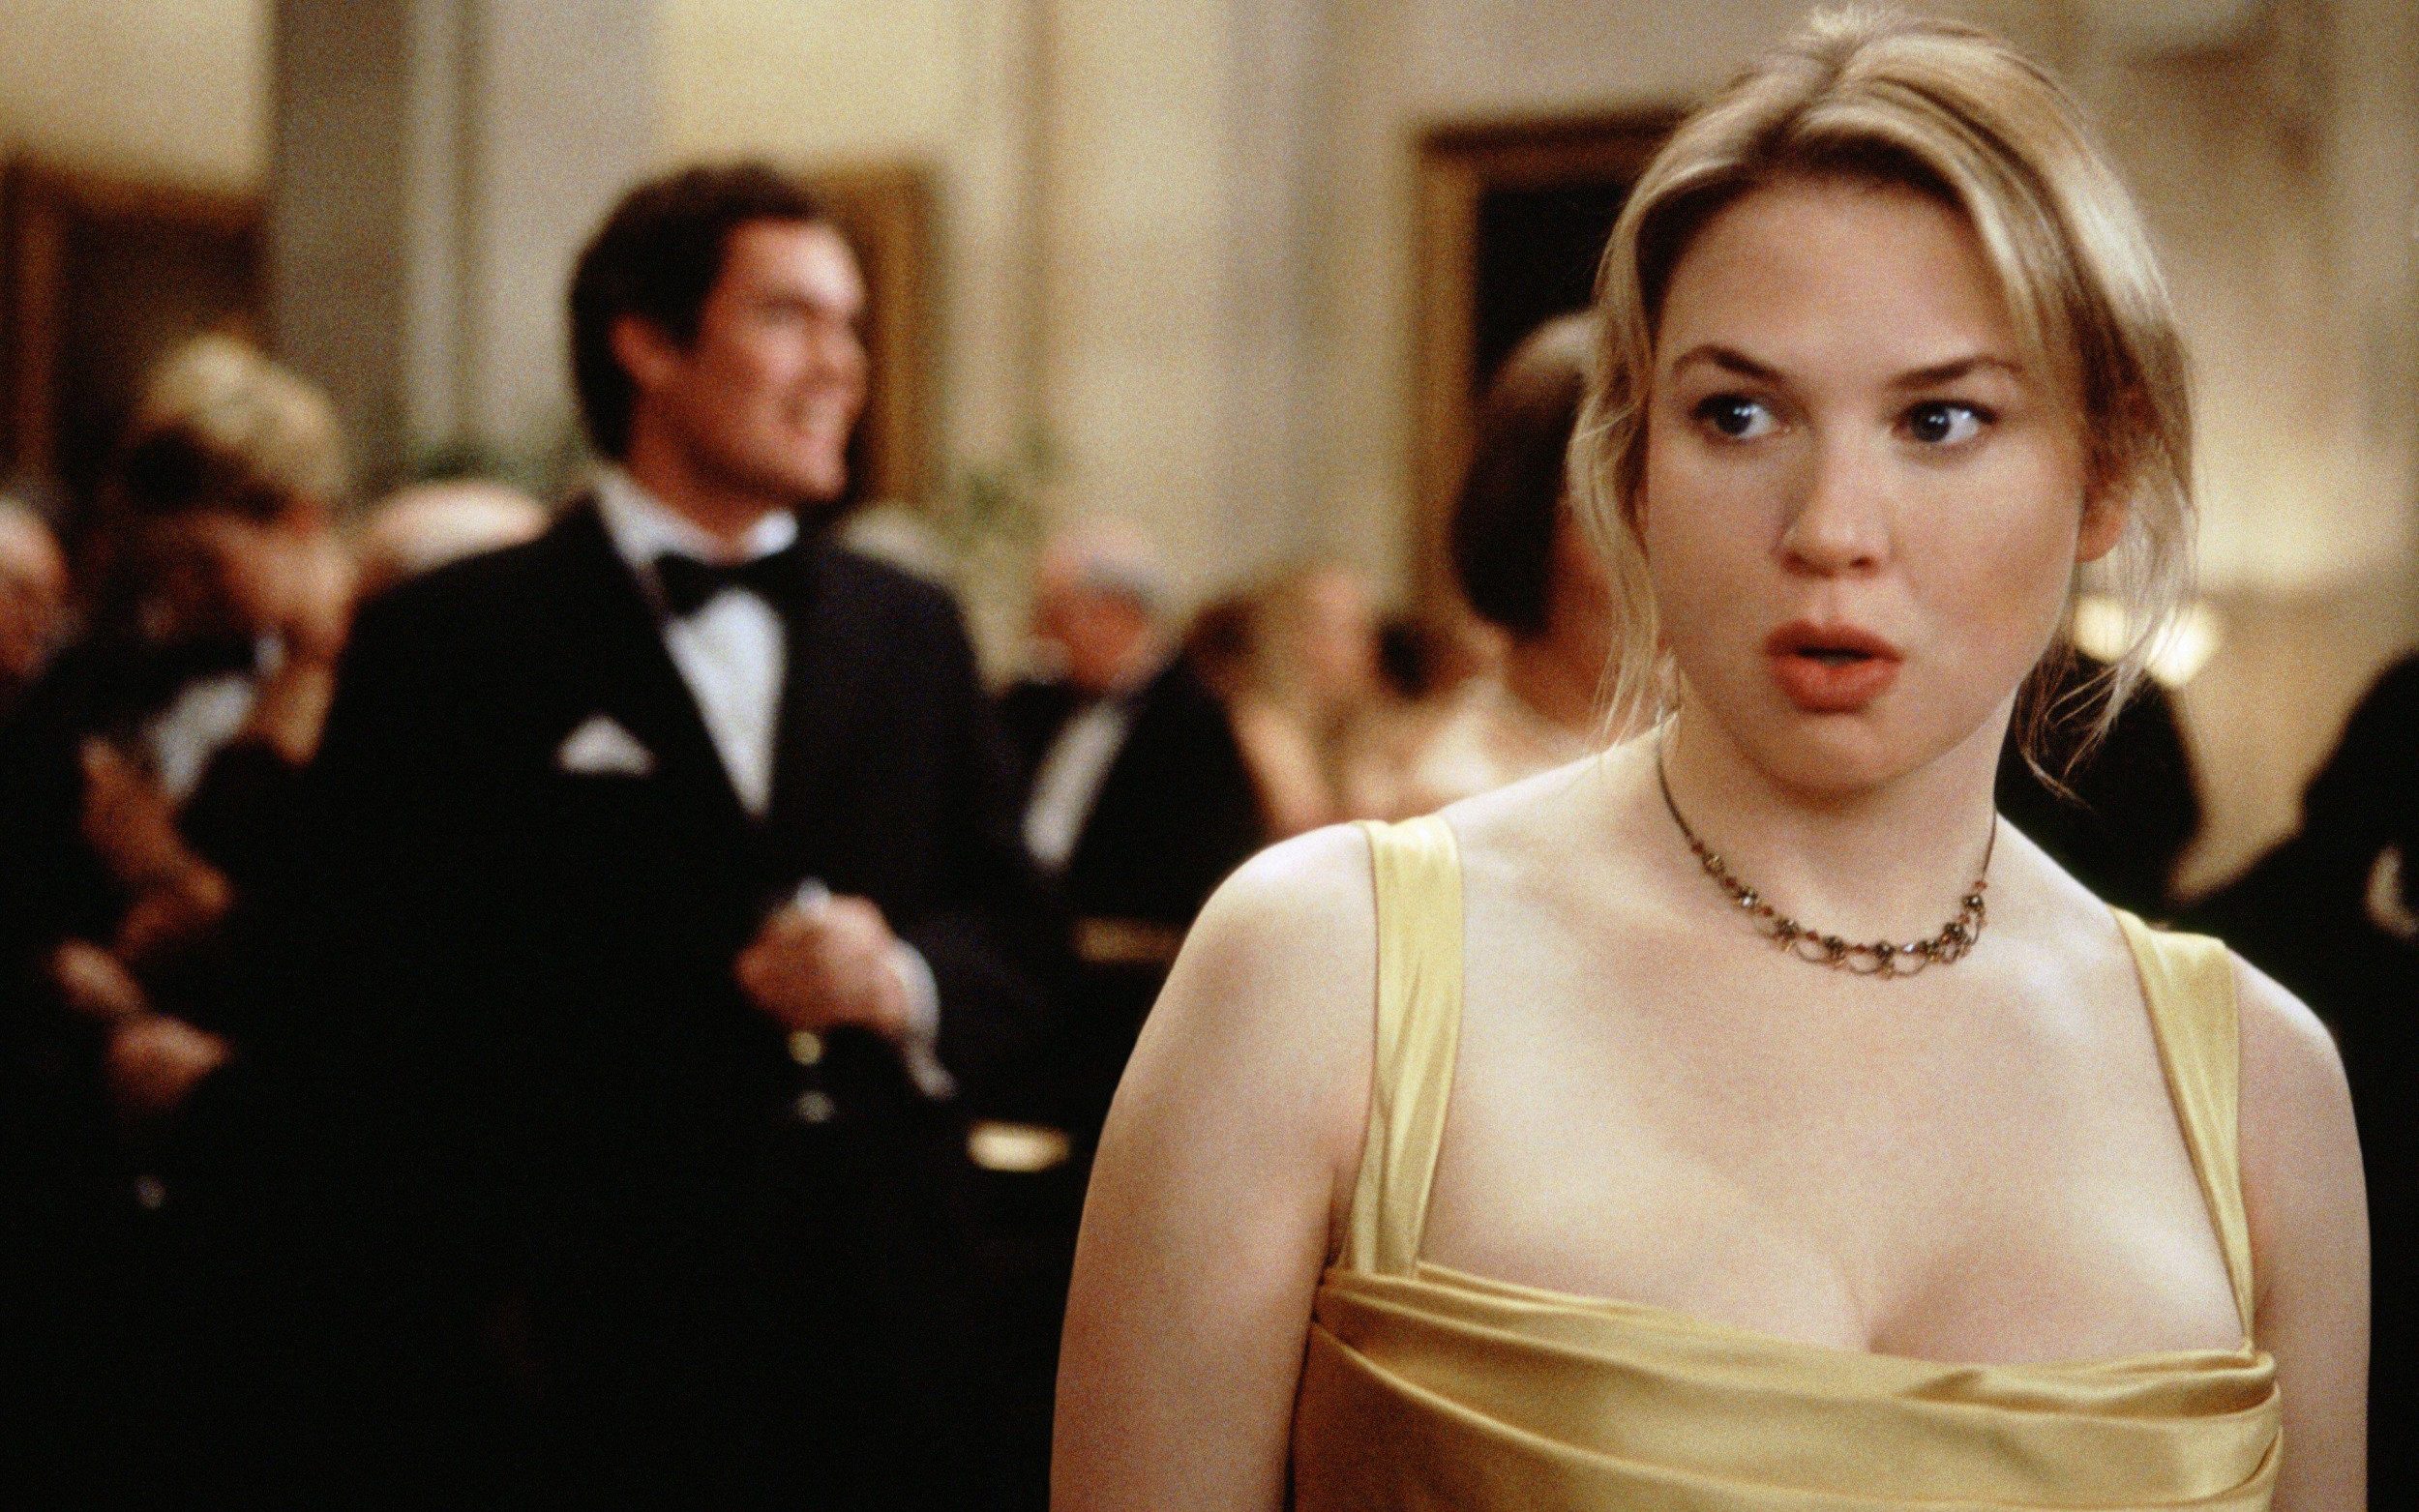 the weight-obsessed woman cliché is in the past. so why do we need another bridget sequel?